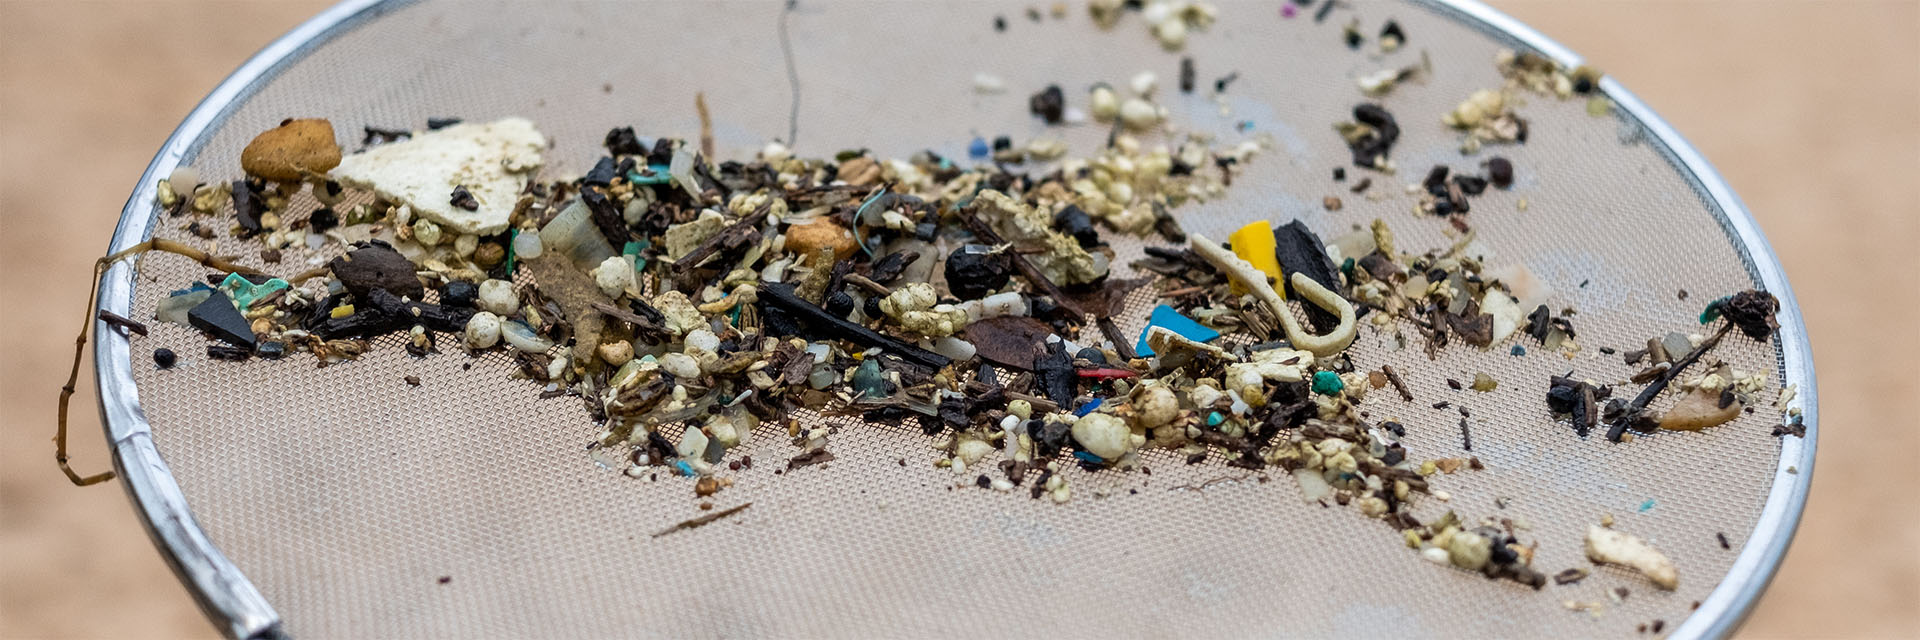 microplastics from the beachside